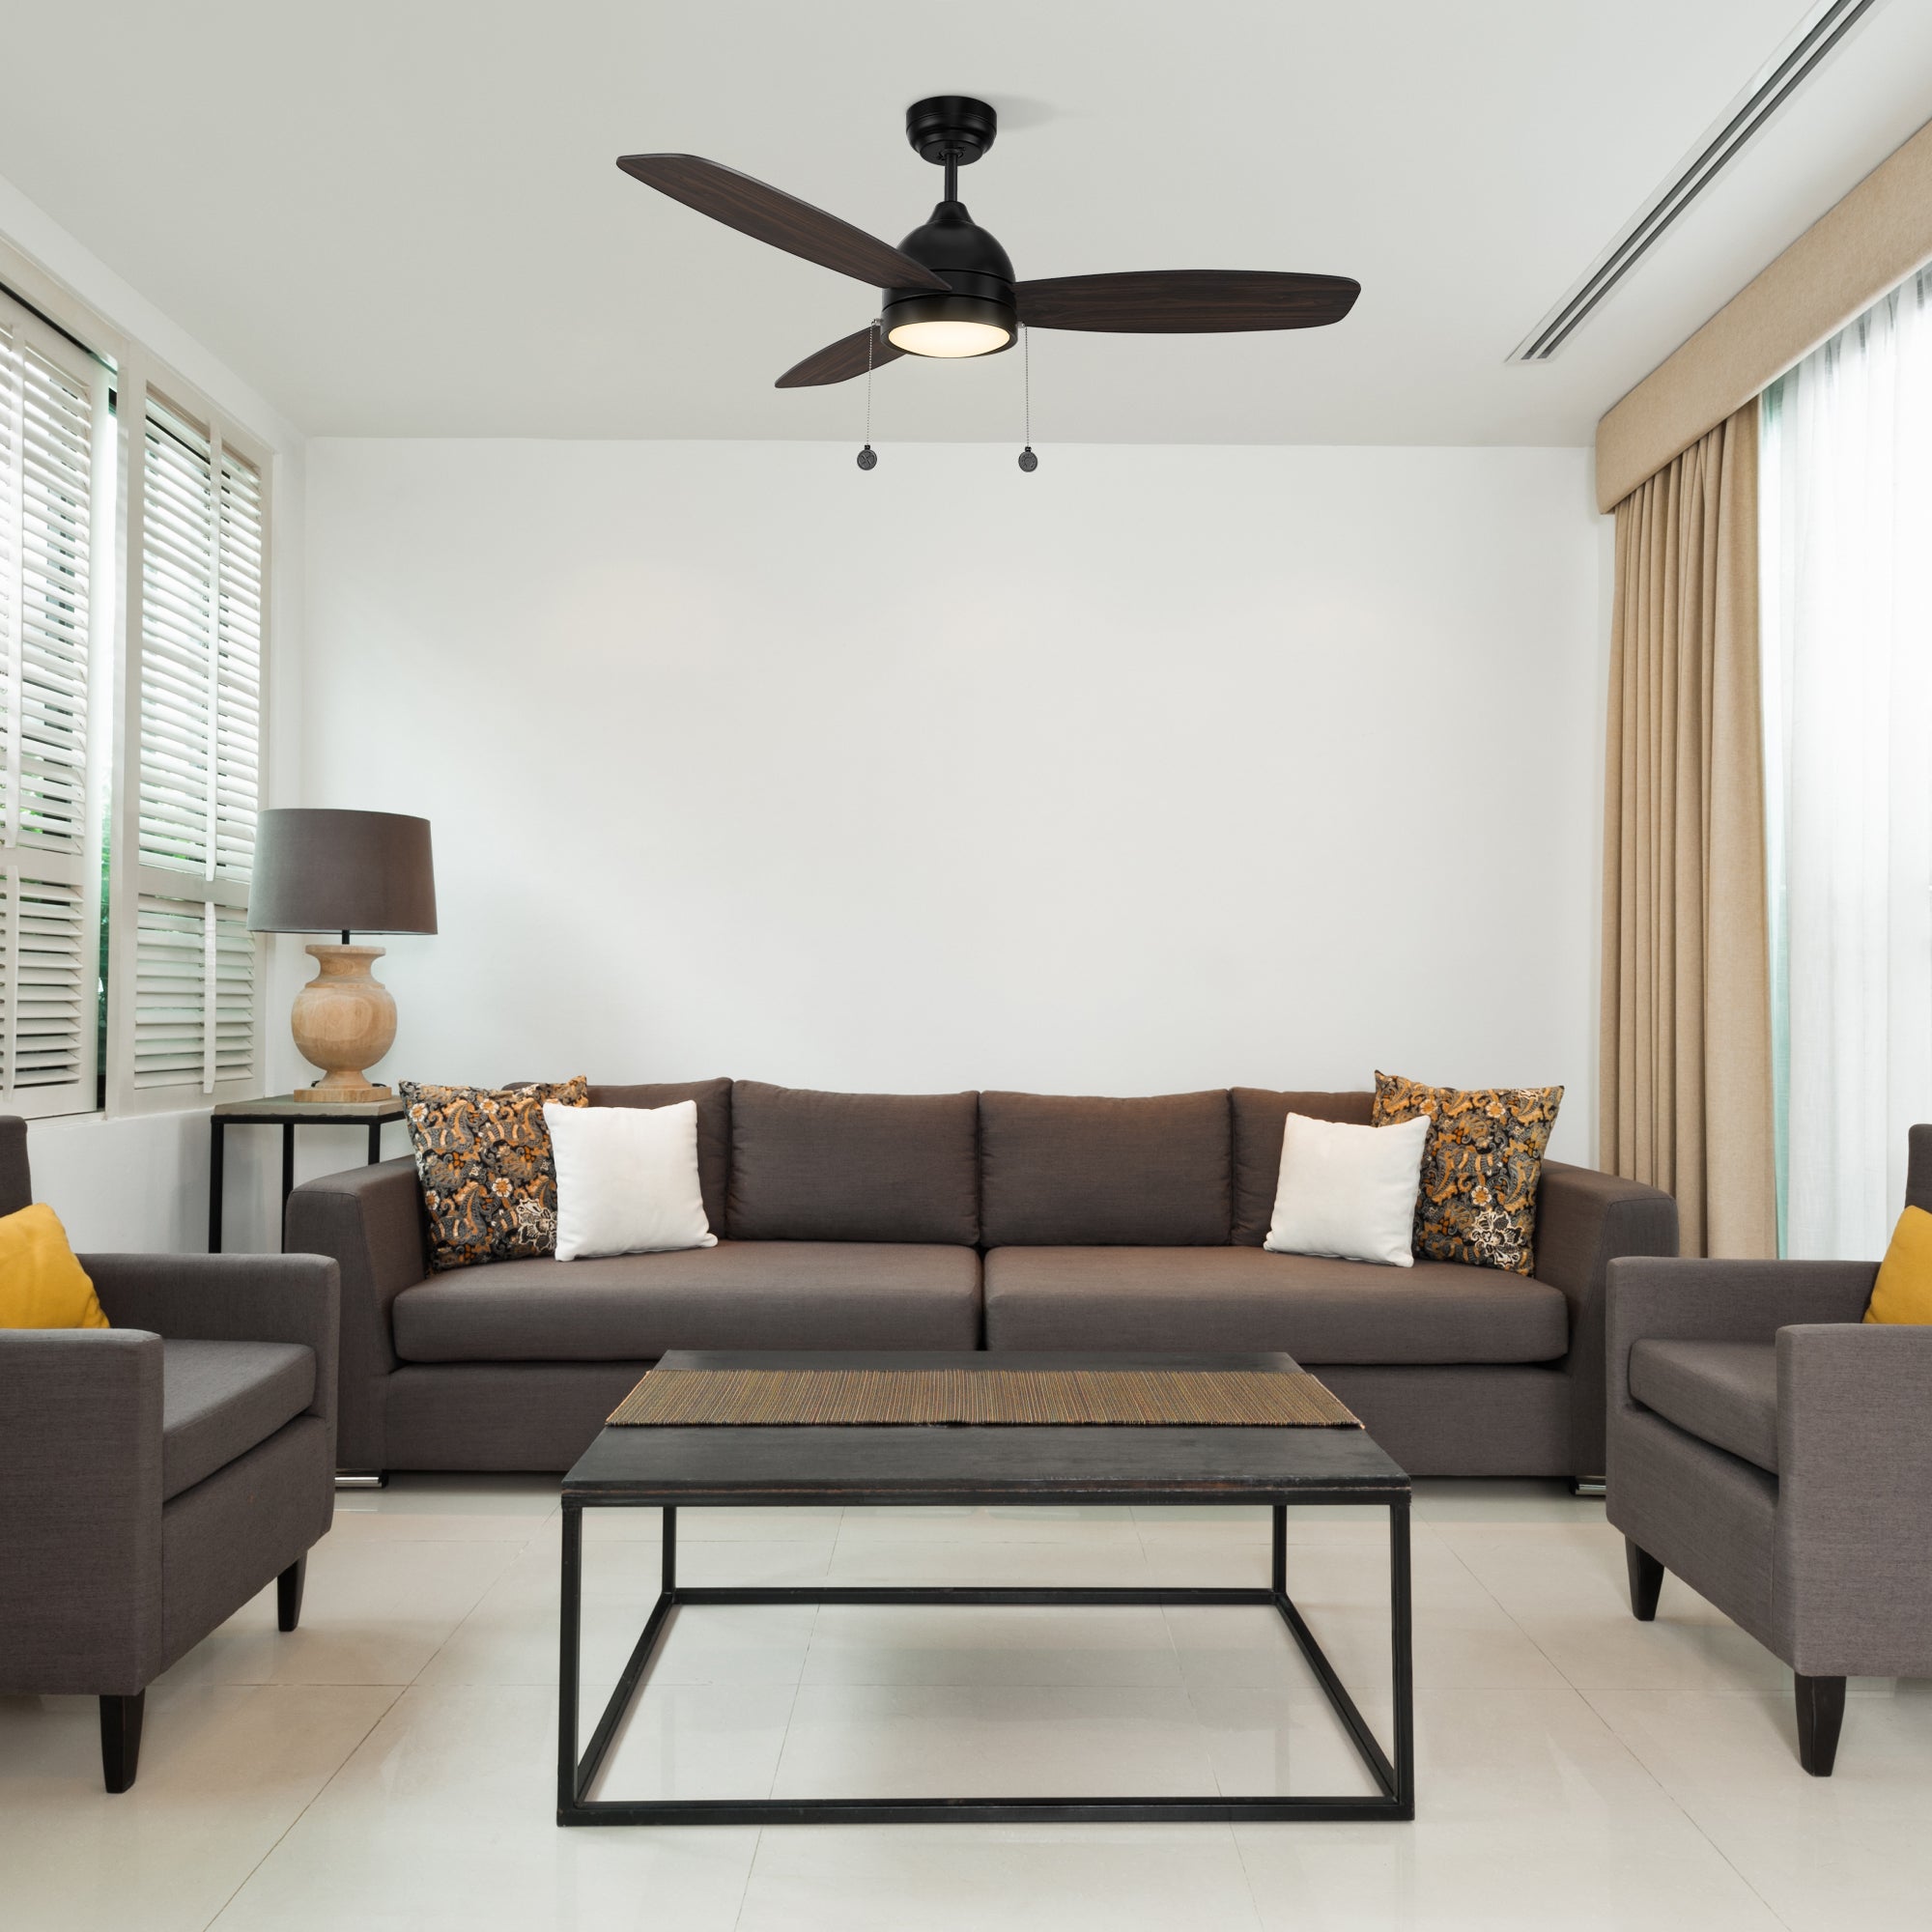 Convenient pull-chain operation for easy fan speed adjustment. Carro Tesoro 52 inch pull chain ceiling fan adds a touch of elegance and optimal air circulation to the living room. 